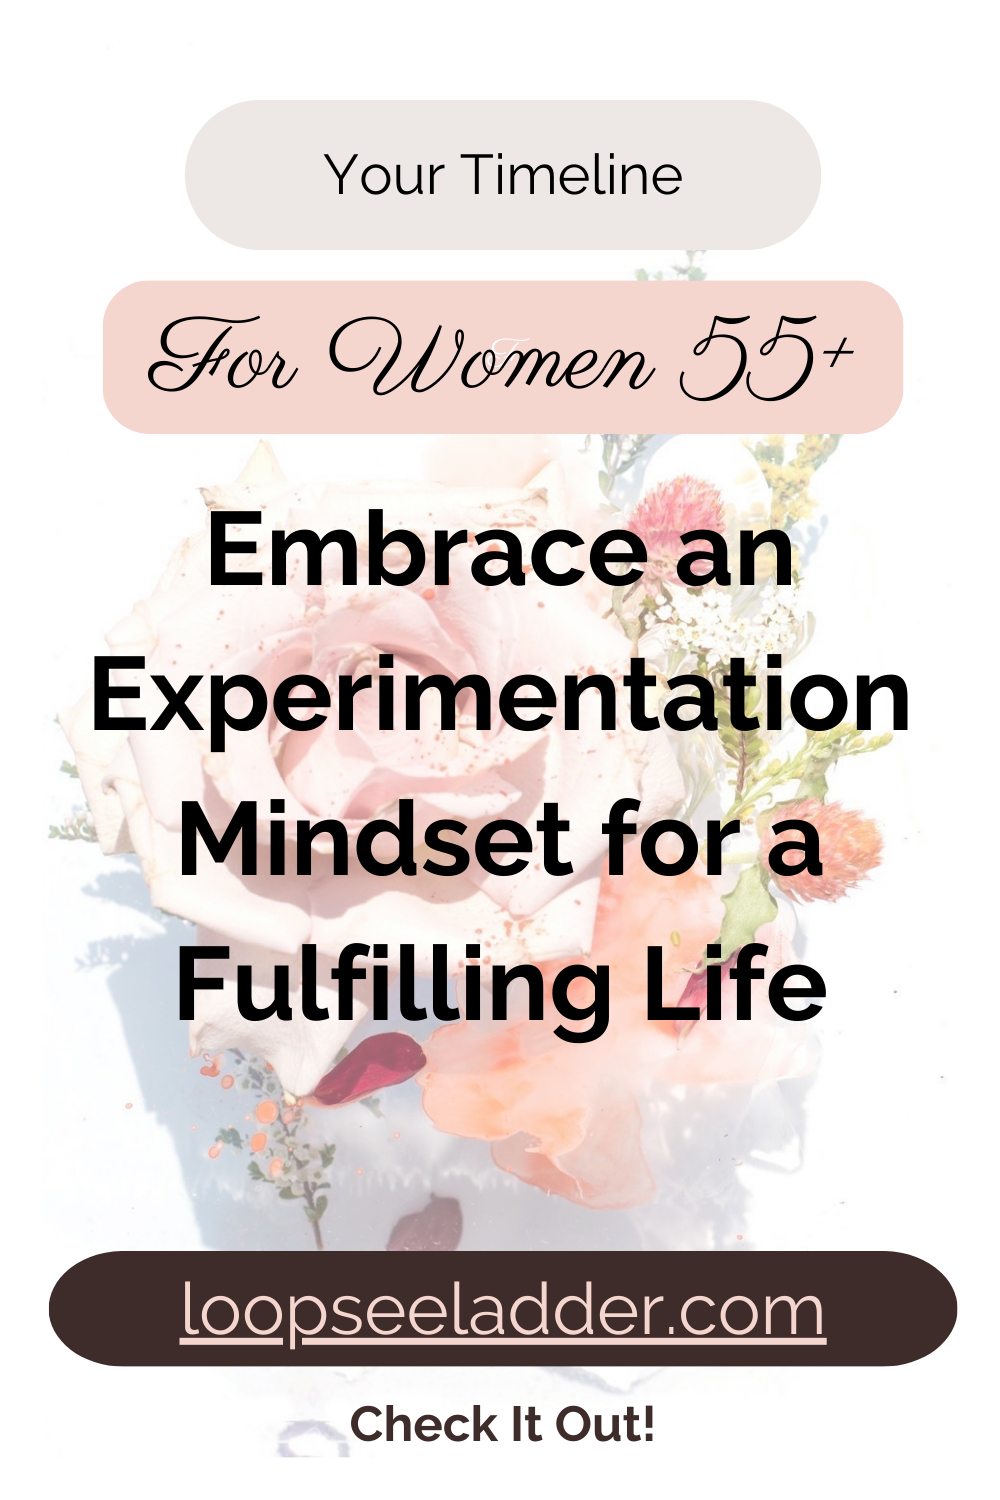 Why Women 55+ Should Embrace an Experimentation Mindset for a Fulfilling Life